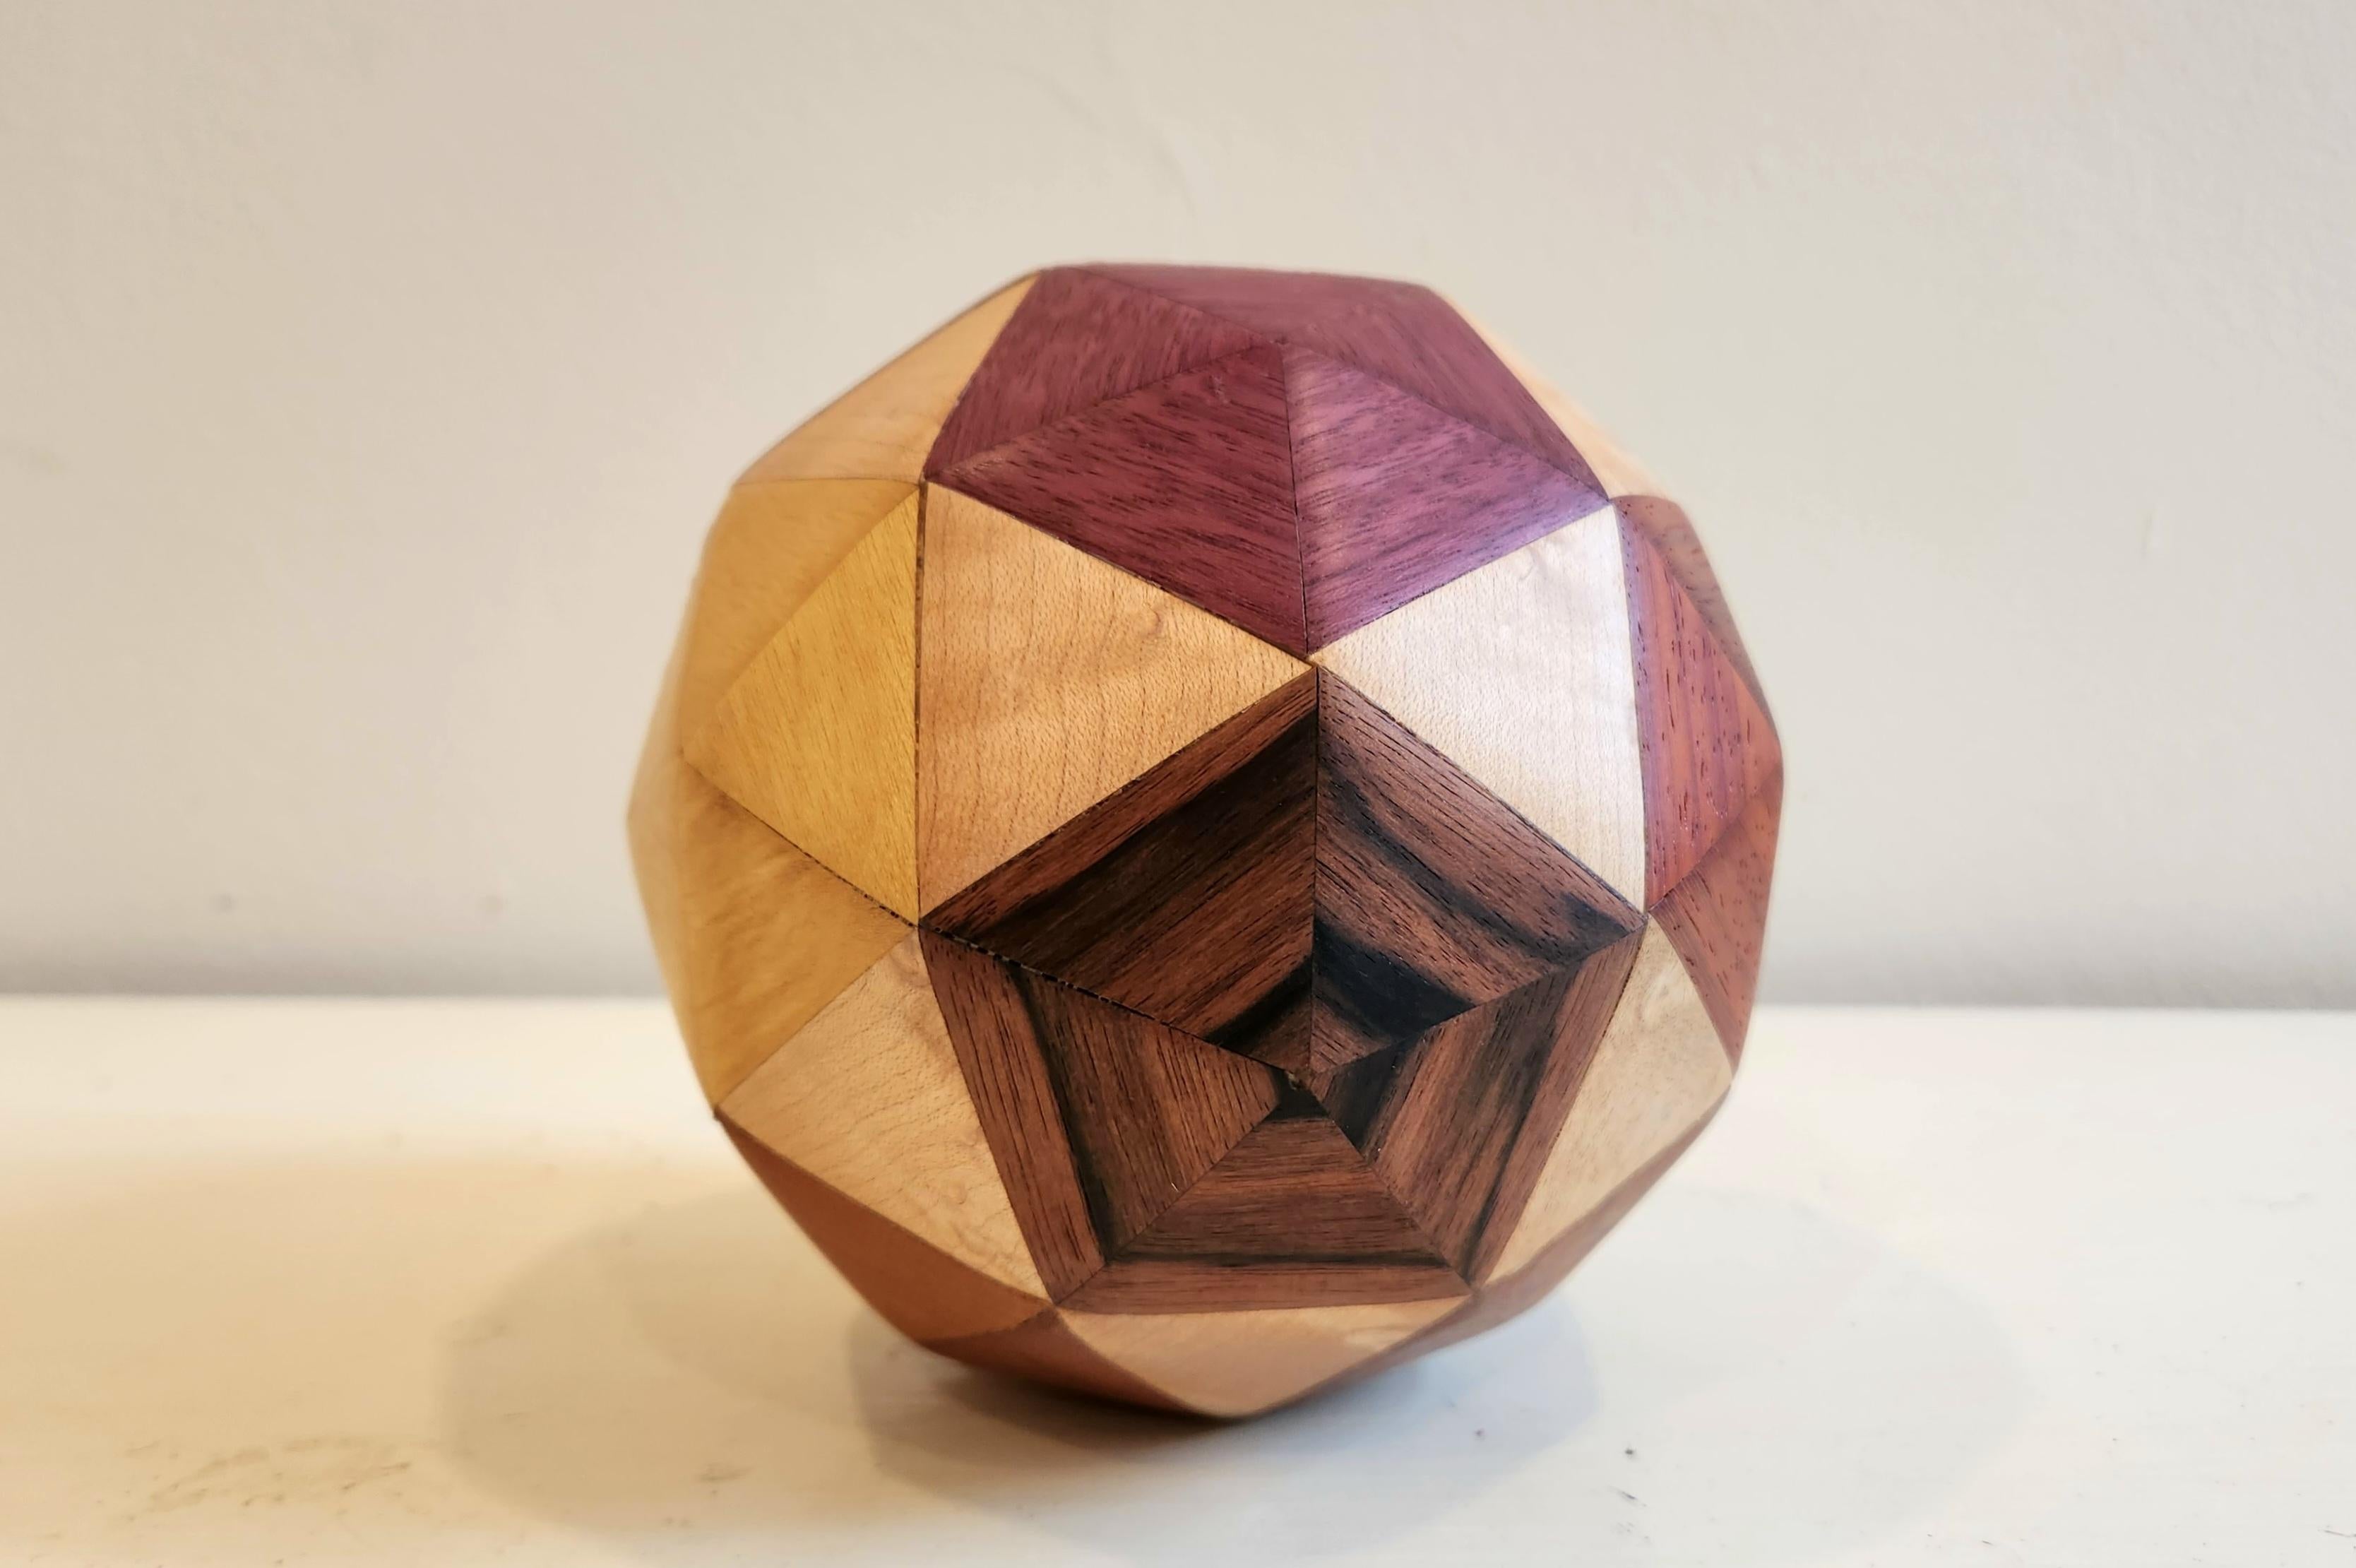 This unique piece is comprised of a variety of exotic hardwoods. This sculpture is composed of 80 individual faces, and is titled Frequency 2 Icosahedron. This work has a calm and elegant nature to it. The intense browns of the wood contrast and